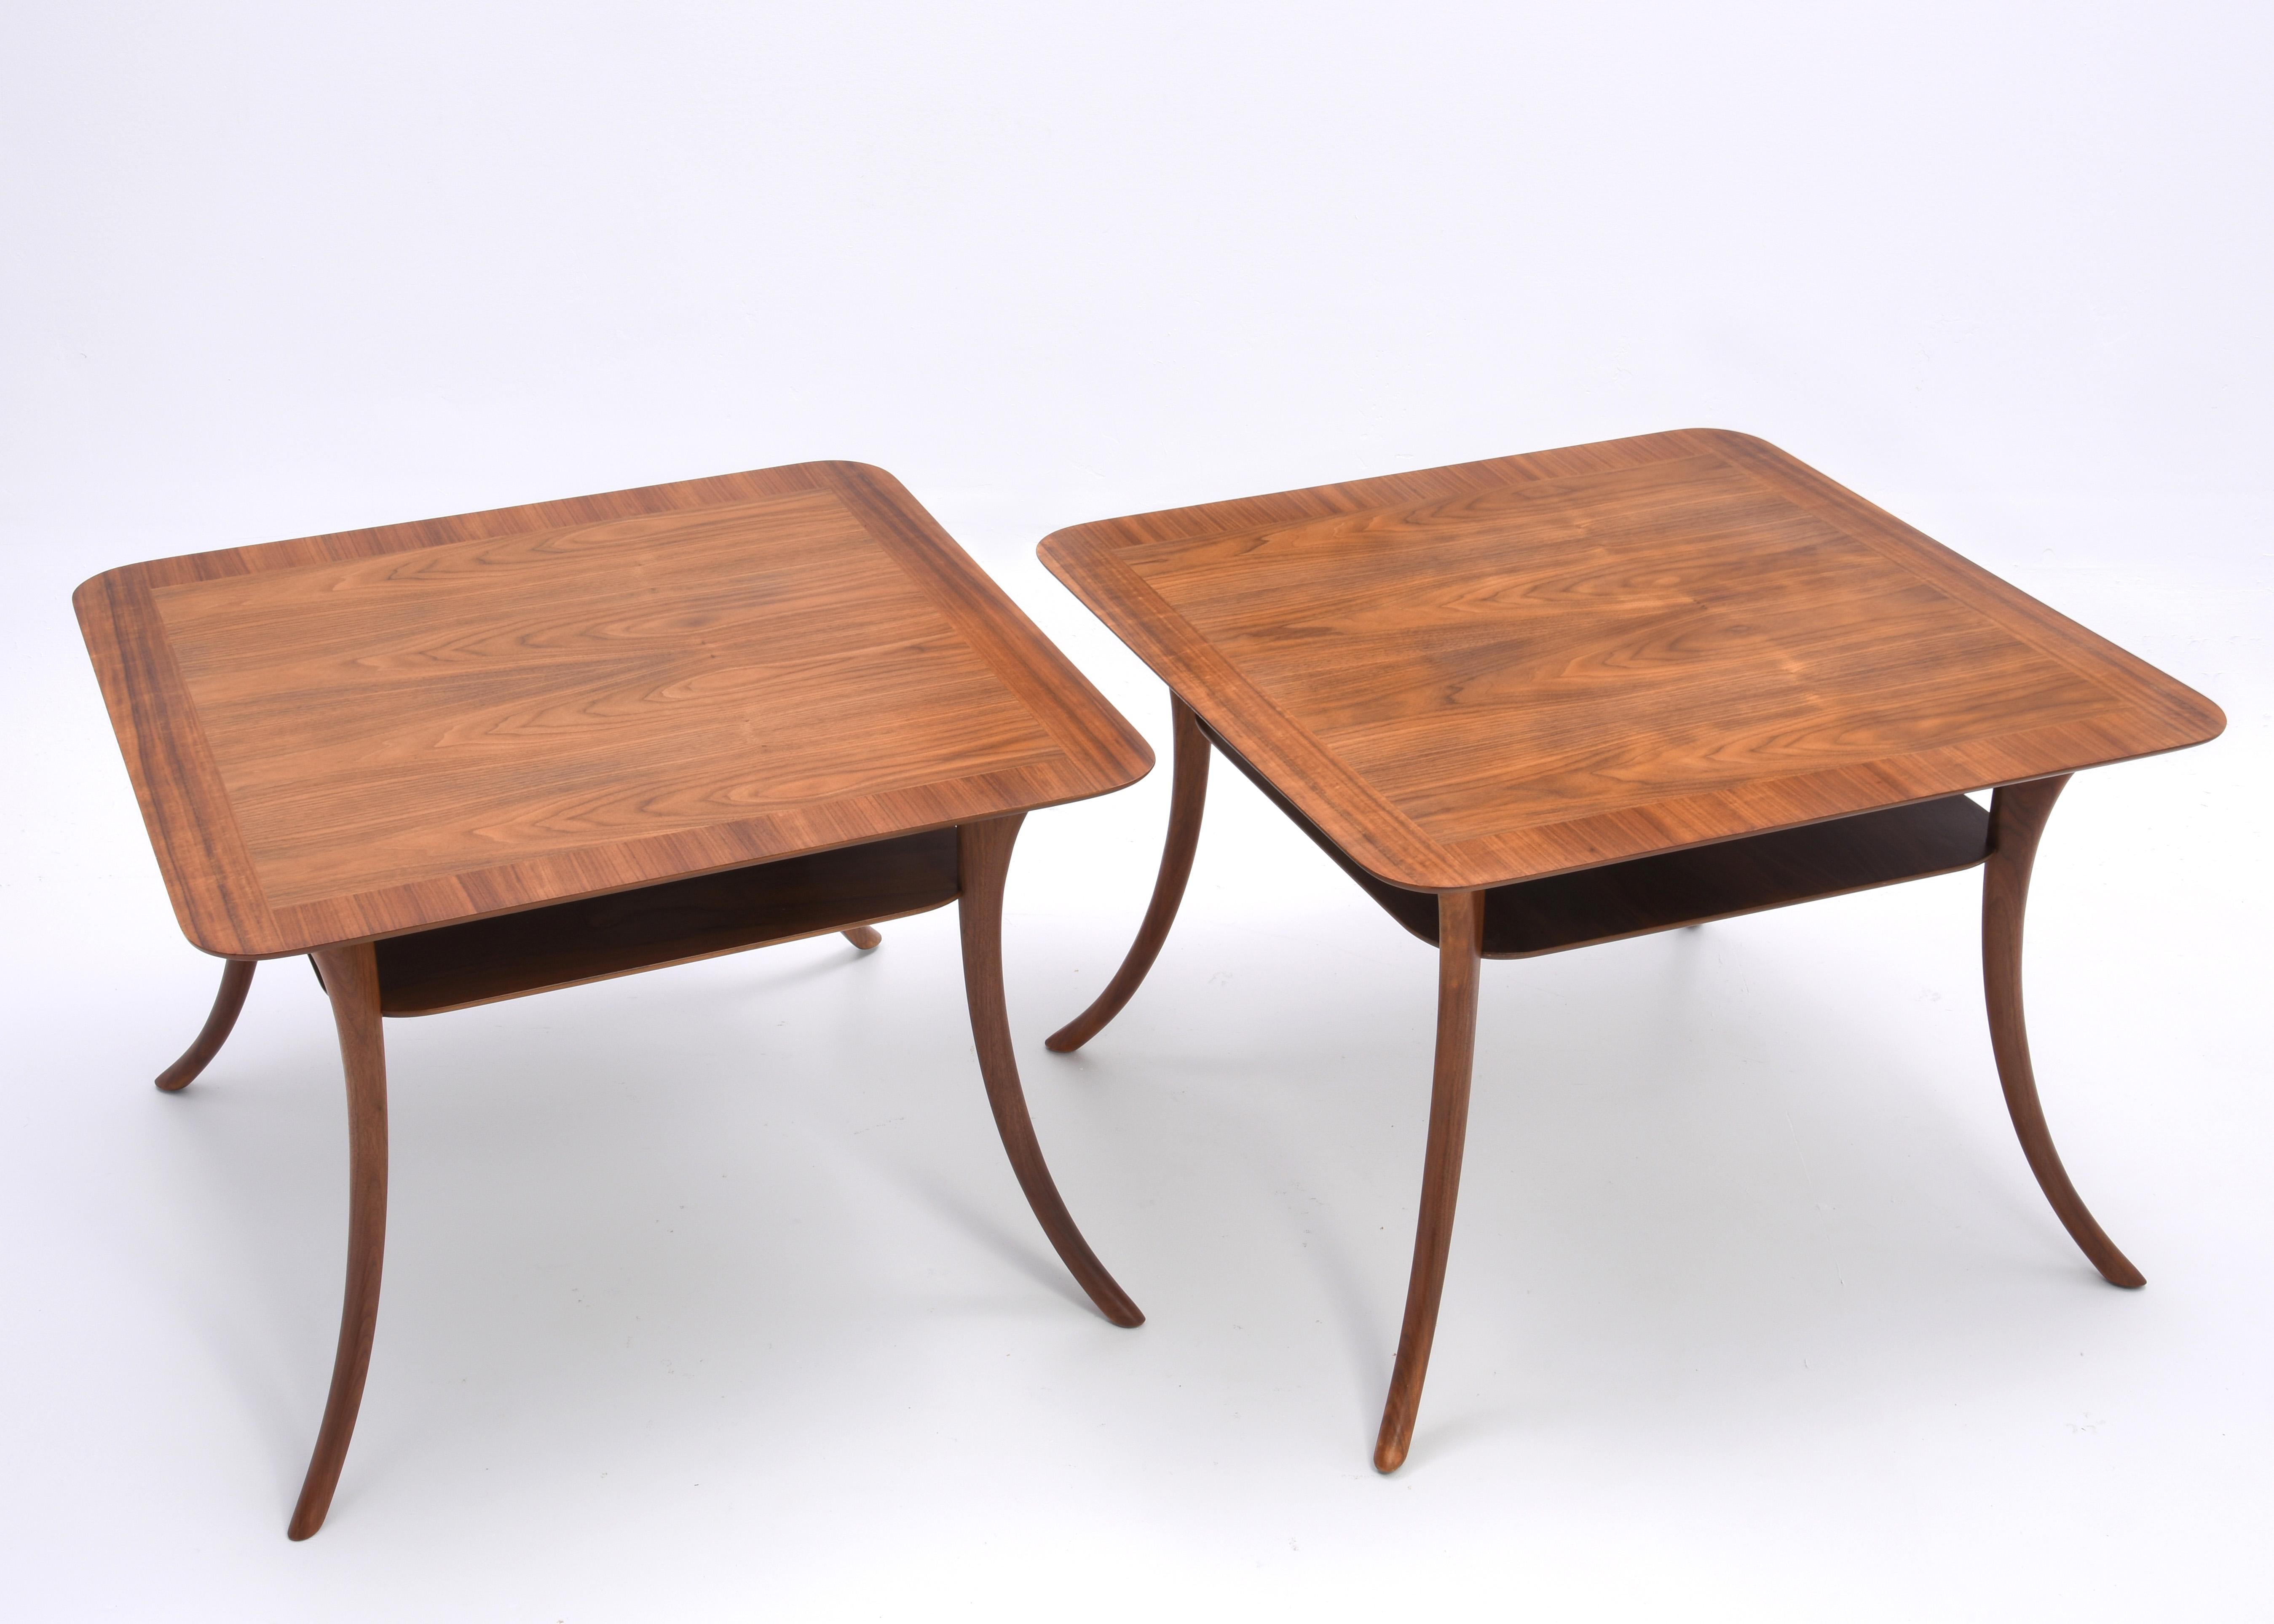 An absolutely gorgeous pair of T.H. Robsjohn Gibbings for Widdicomb side or cocktail tables, ca 1957. Banded and book matched tops. The graceful saber legs are reminiscent of the Klismos chair.